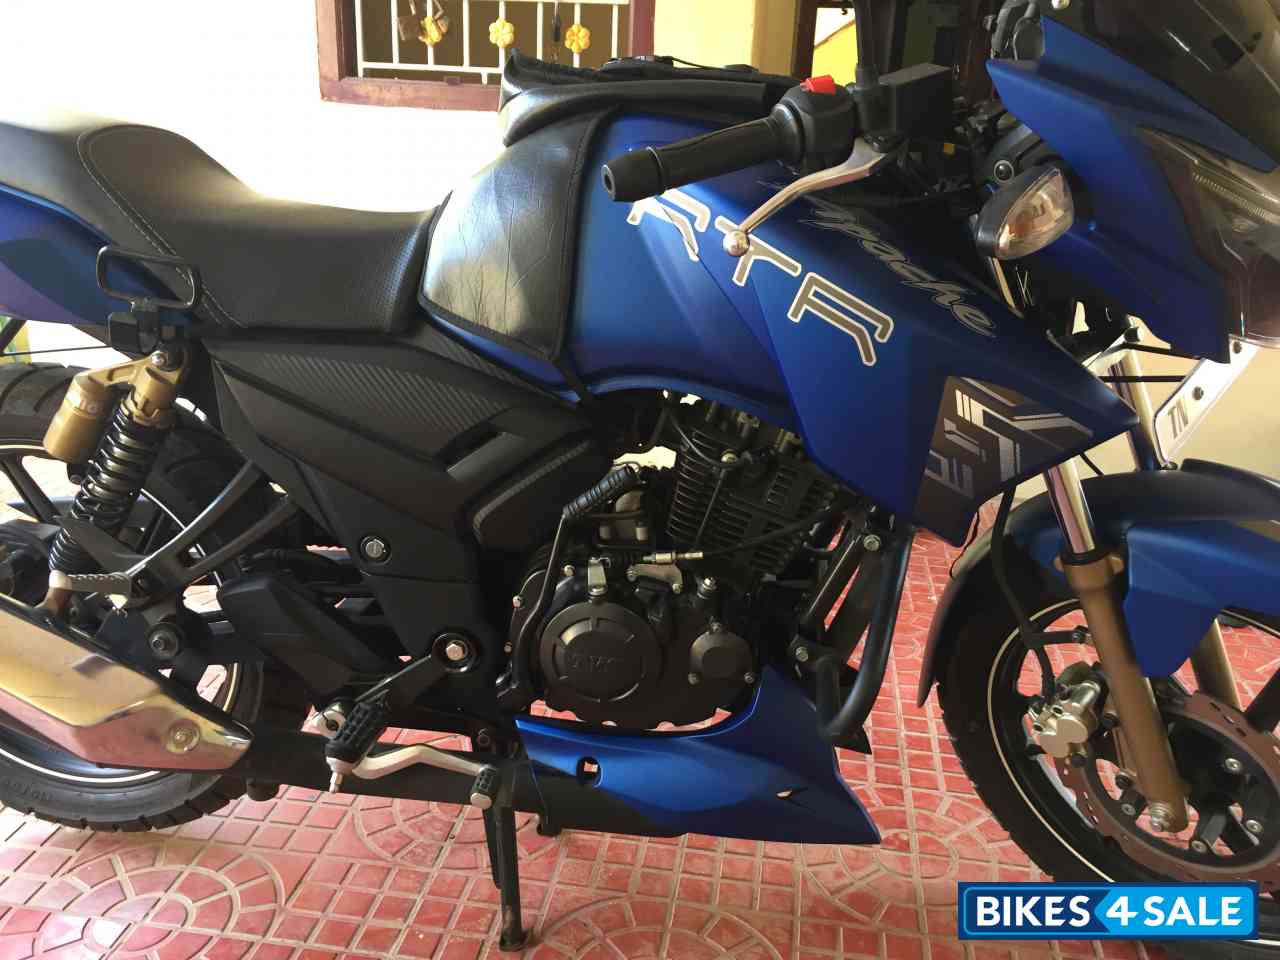 Used 2017 model TVS Apache RTR 180 for sale in Thanjavur ...